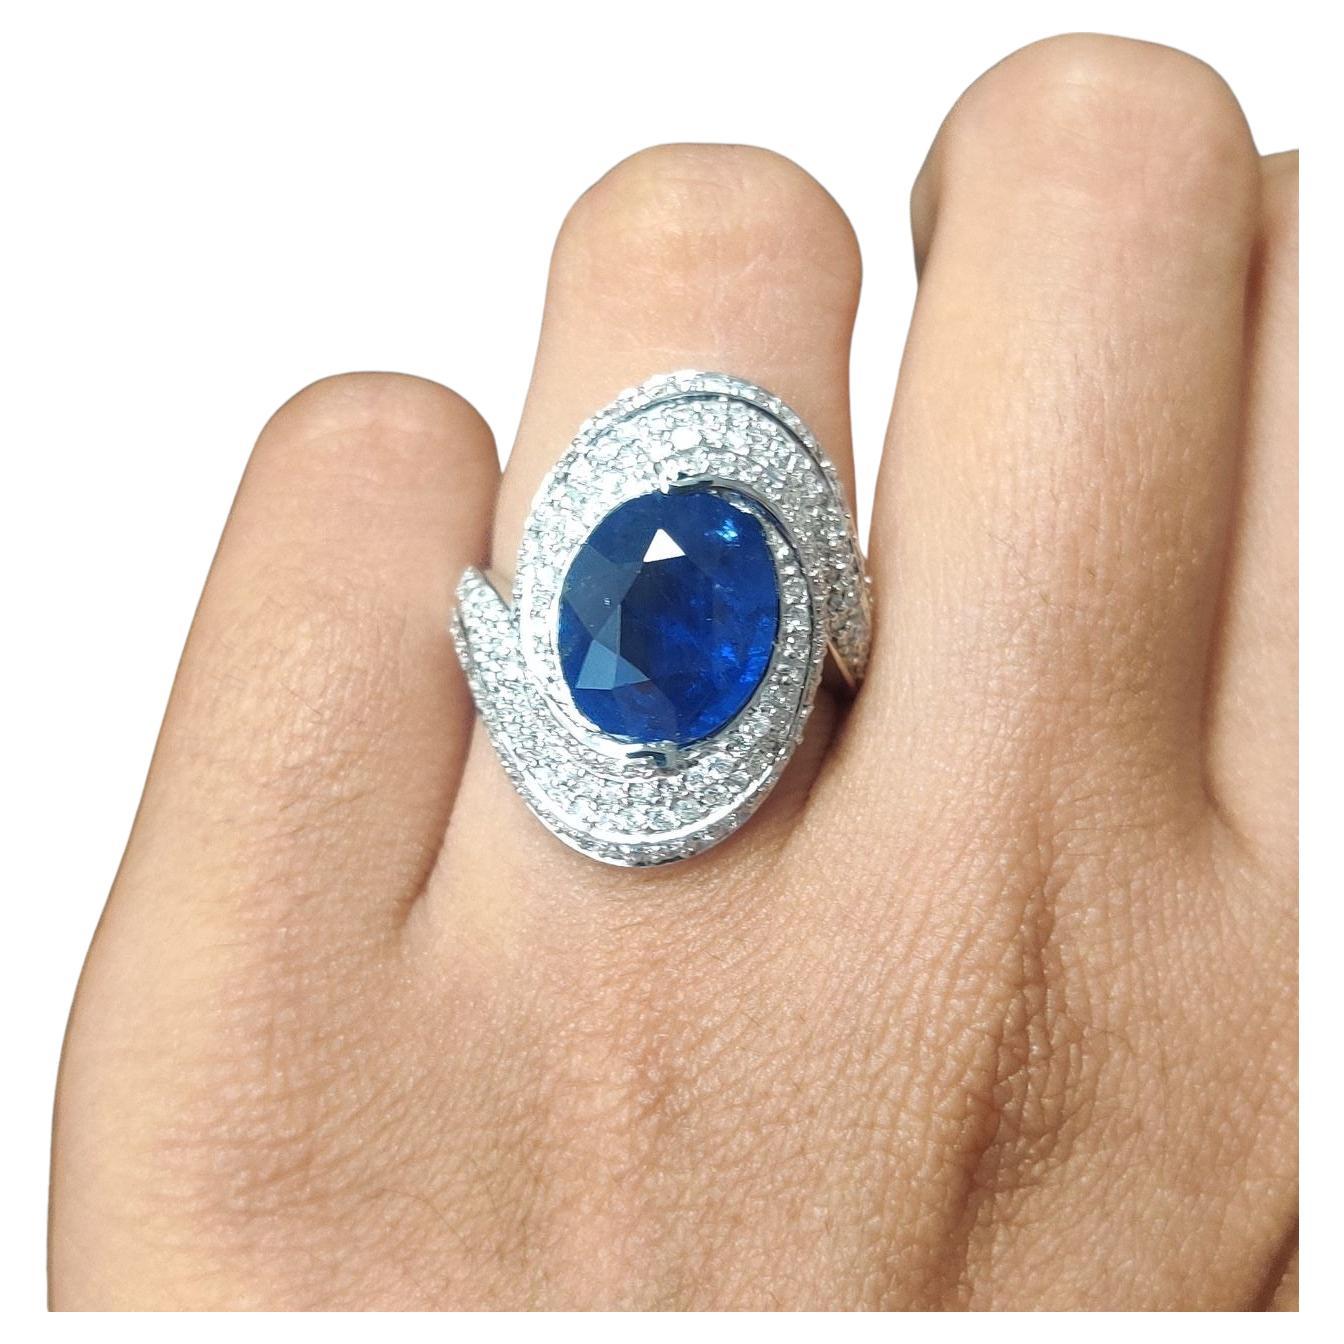 This 4.32 carat Blue Sapphire Fancy Cocktail Ring in 18K White Gold features a centerpiece originating from Sri Lanka. The Sapphire, with a royal blue hue, is oval-cut and has undergone normal heat treatment only, ensuring its natural beauty. The